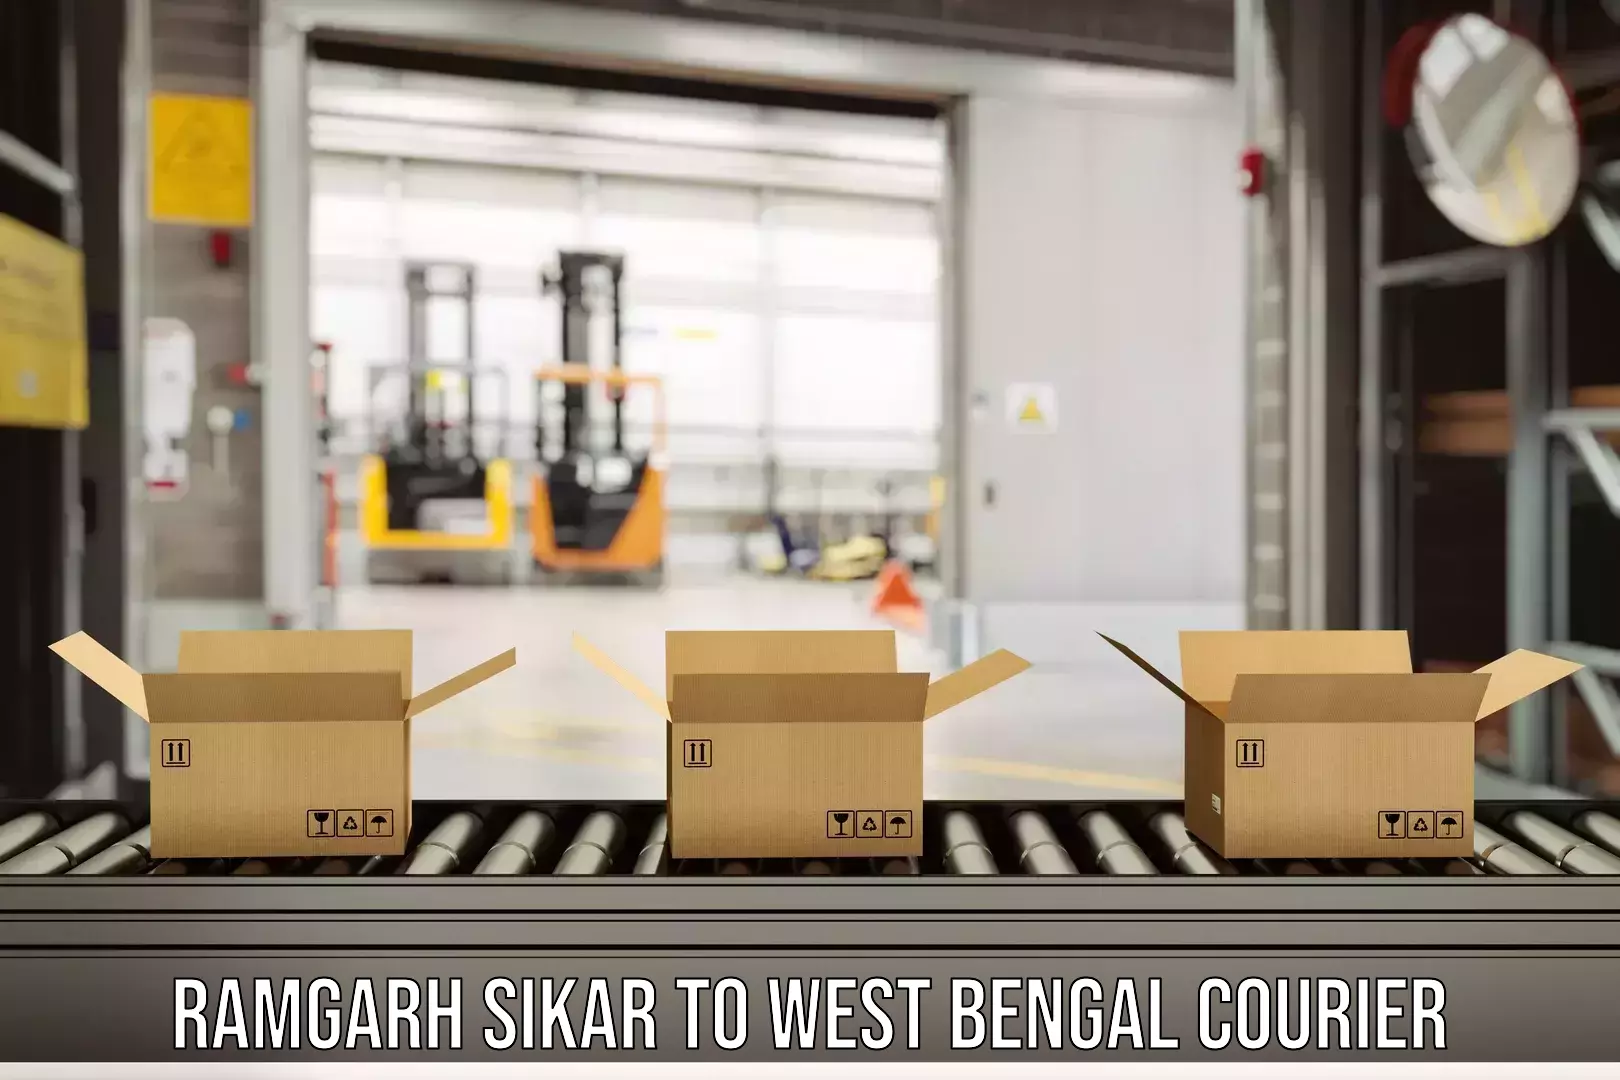 Expedited shipping methods Ramgarh Sikar to Budge Budge